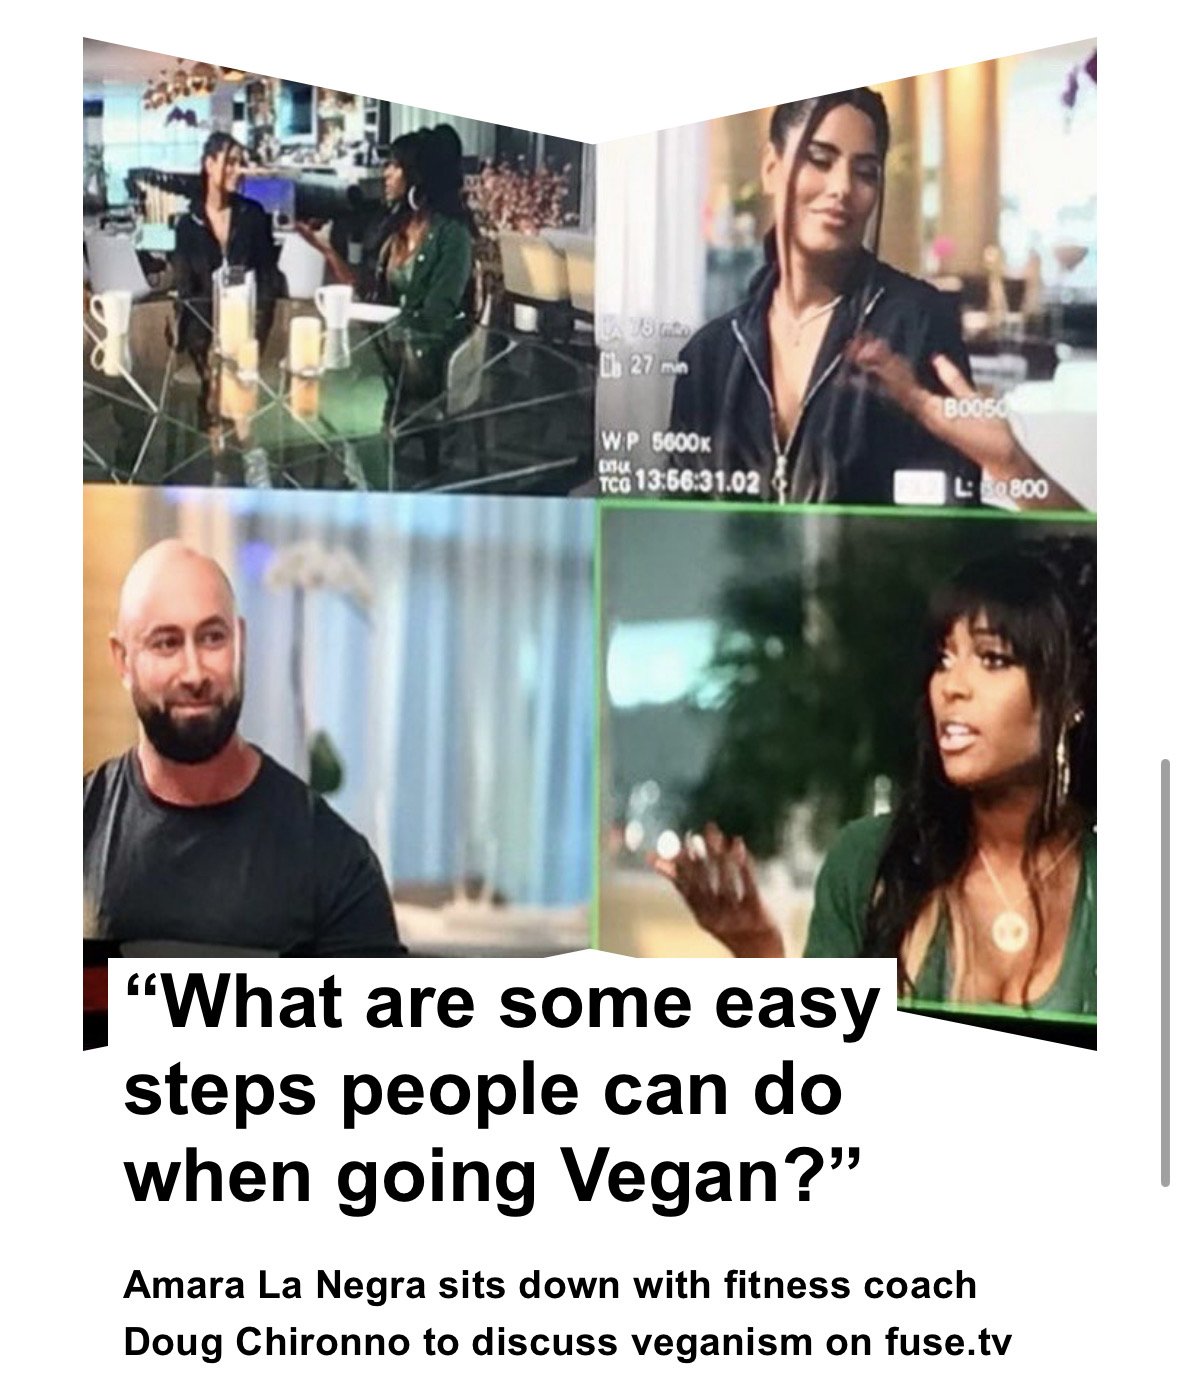  Dougfit discusses veganism and diet on fuse tv 